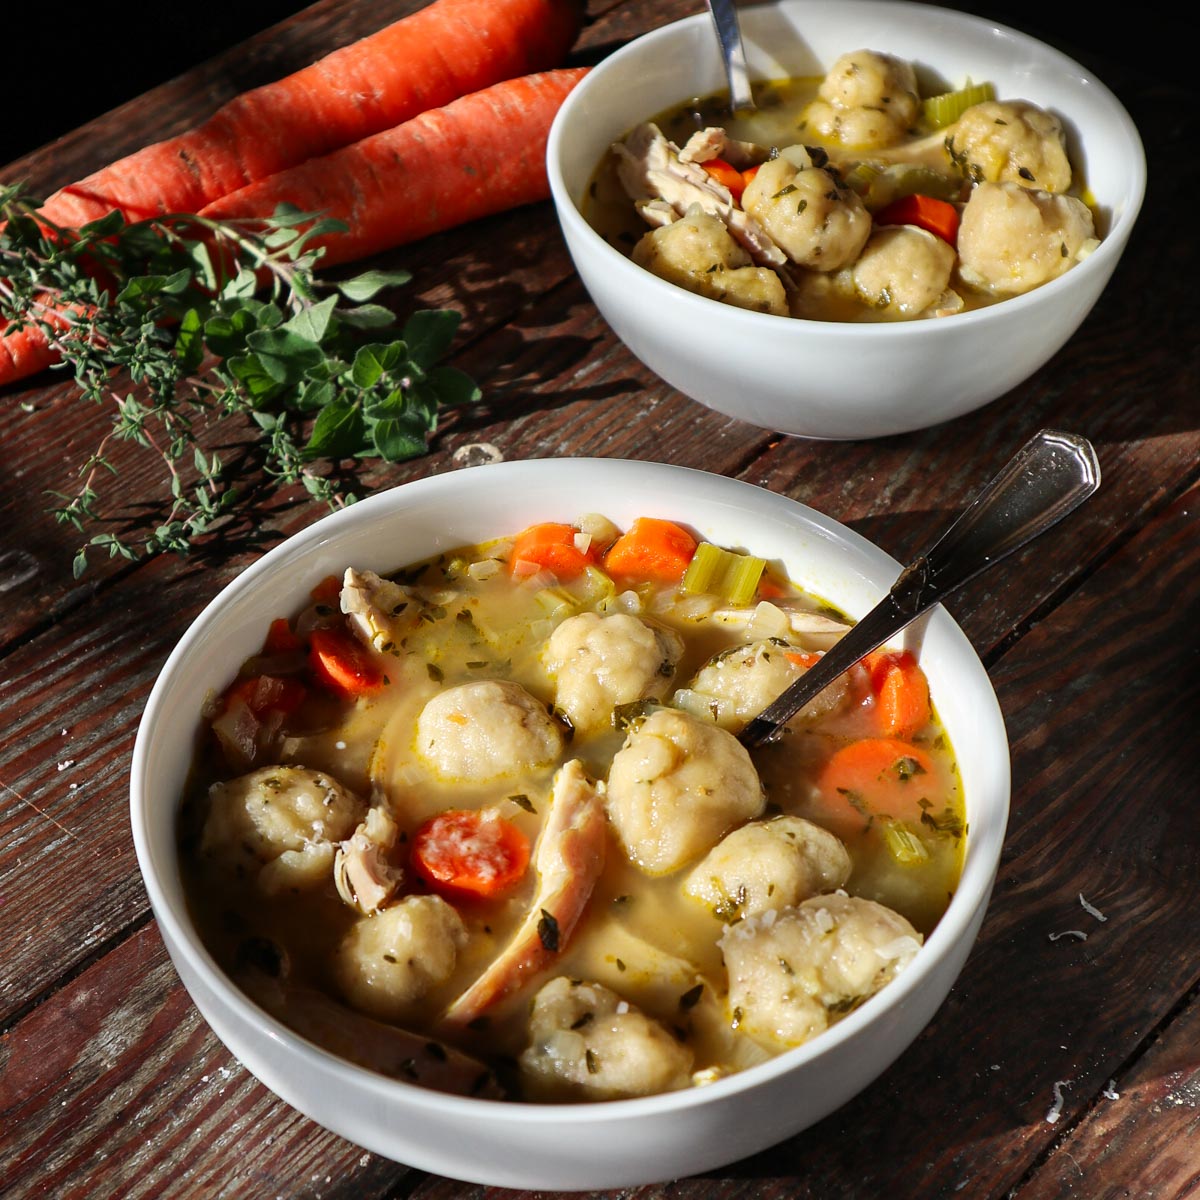 2 bowls full ofSourdough chicken and dumplings. Fresh herbs and carrots in the background.